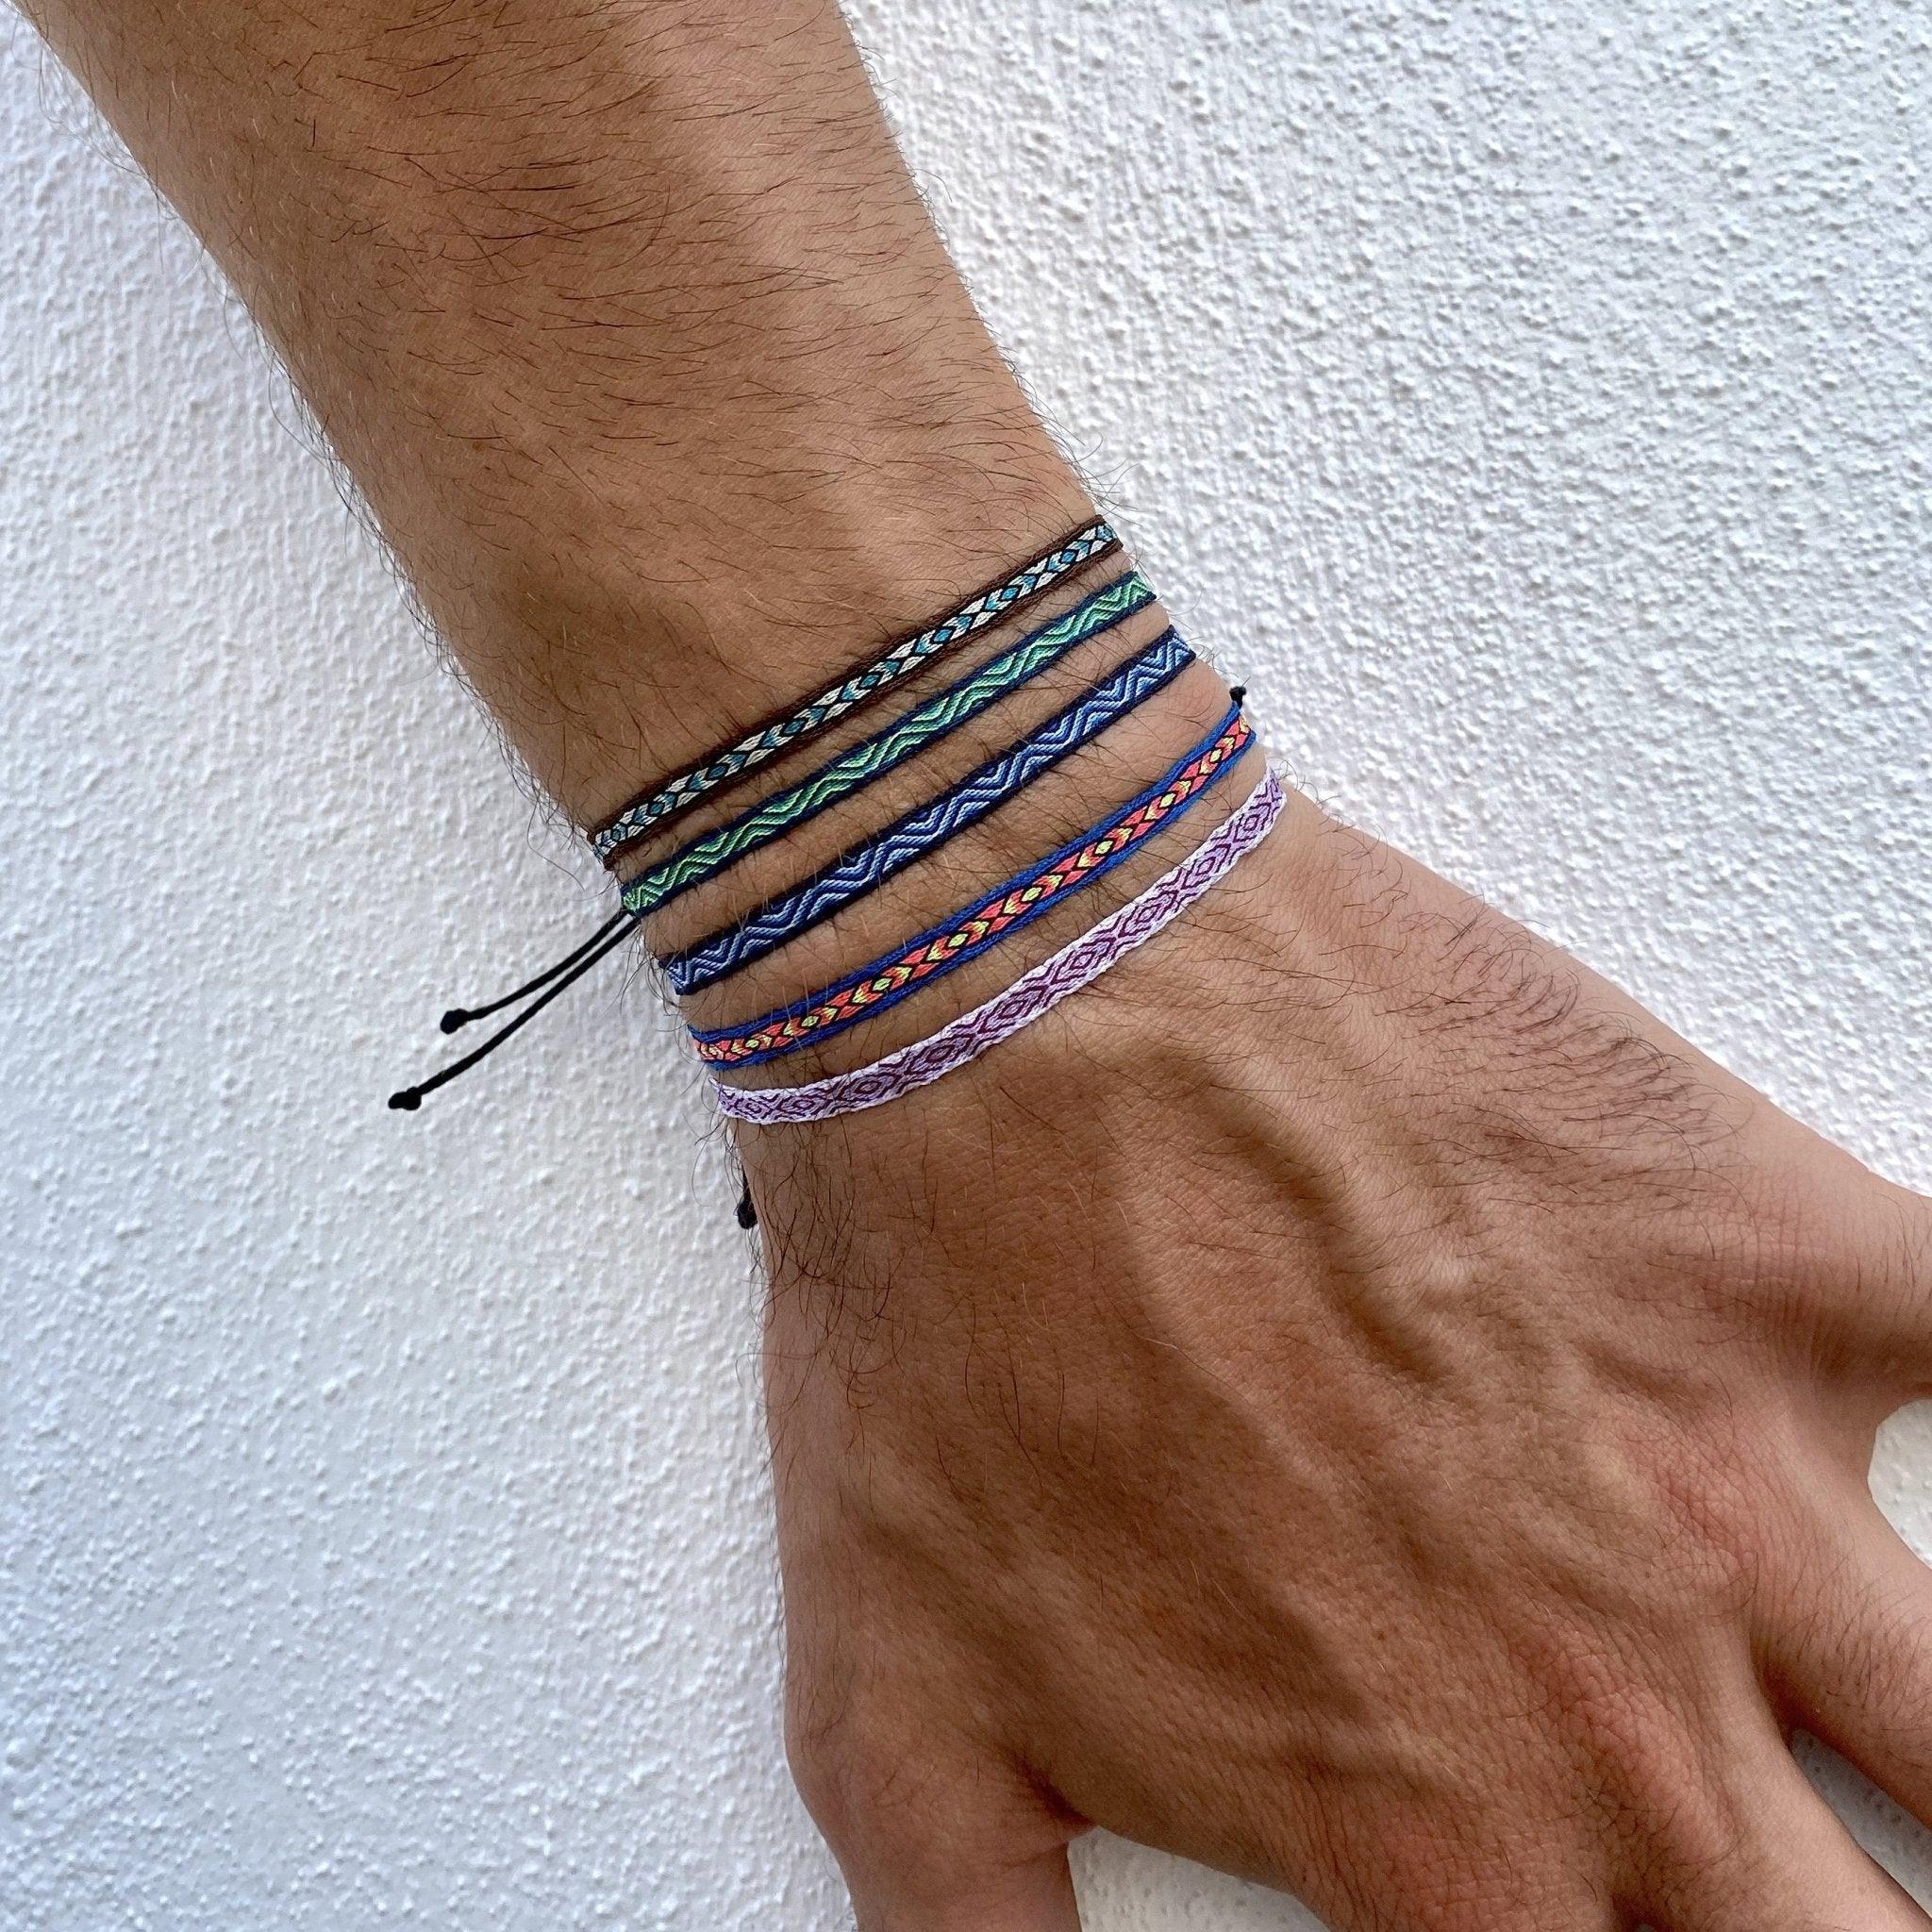 Buy Mexican Handmade Bracelets, Accessories